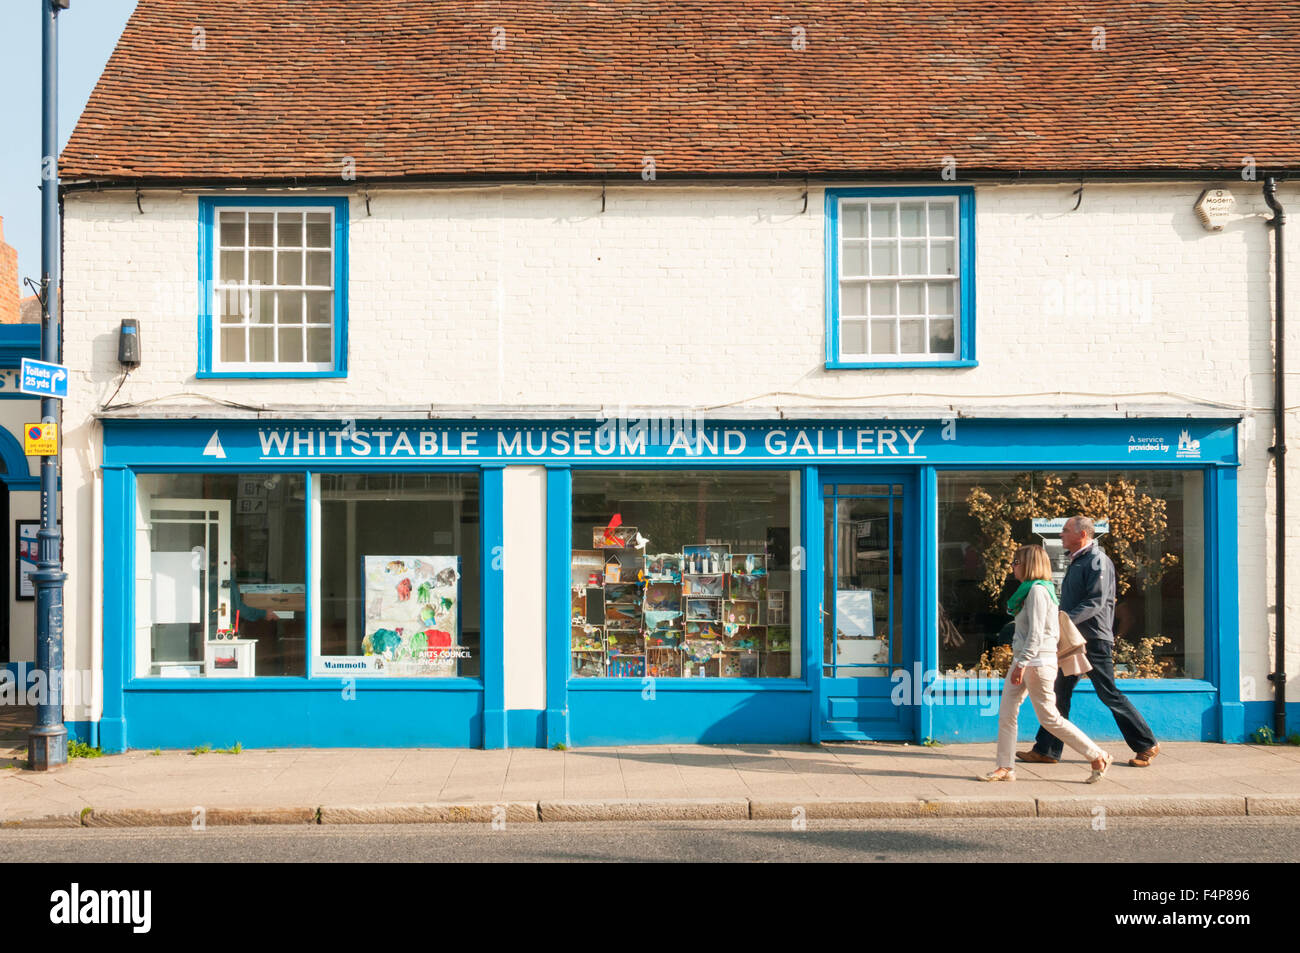 Whitstable Museum and Gallery. Stock Photo